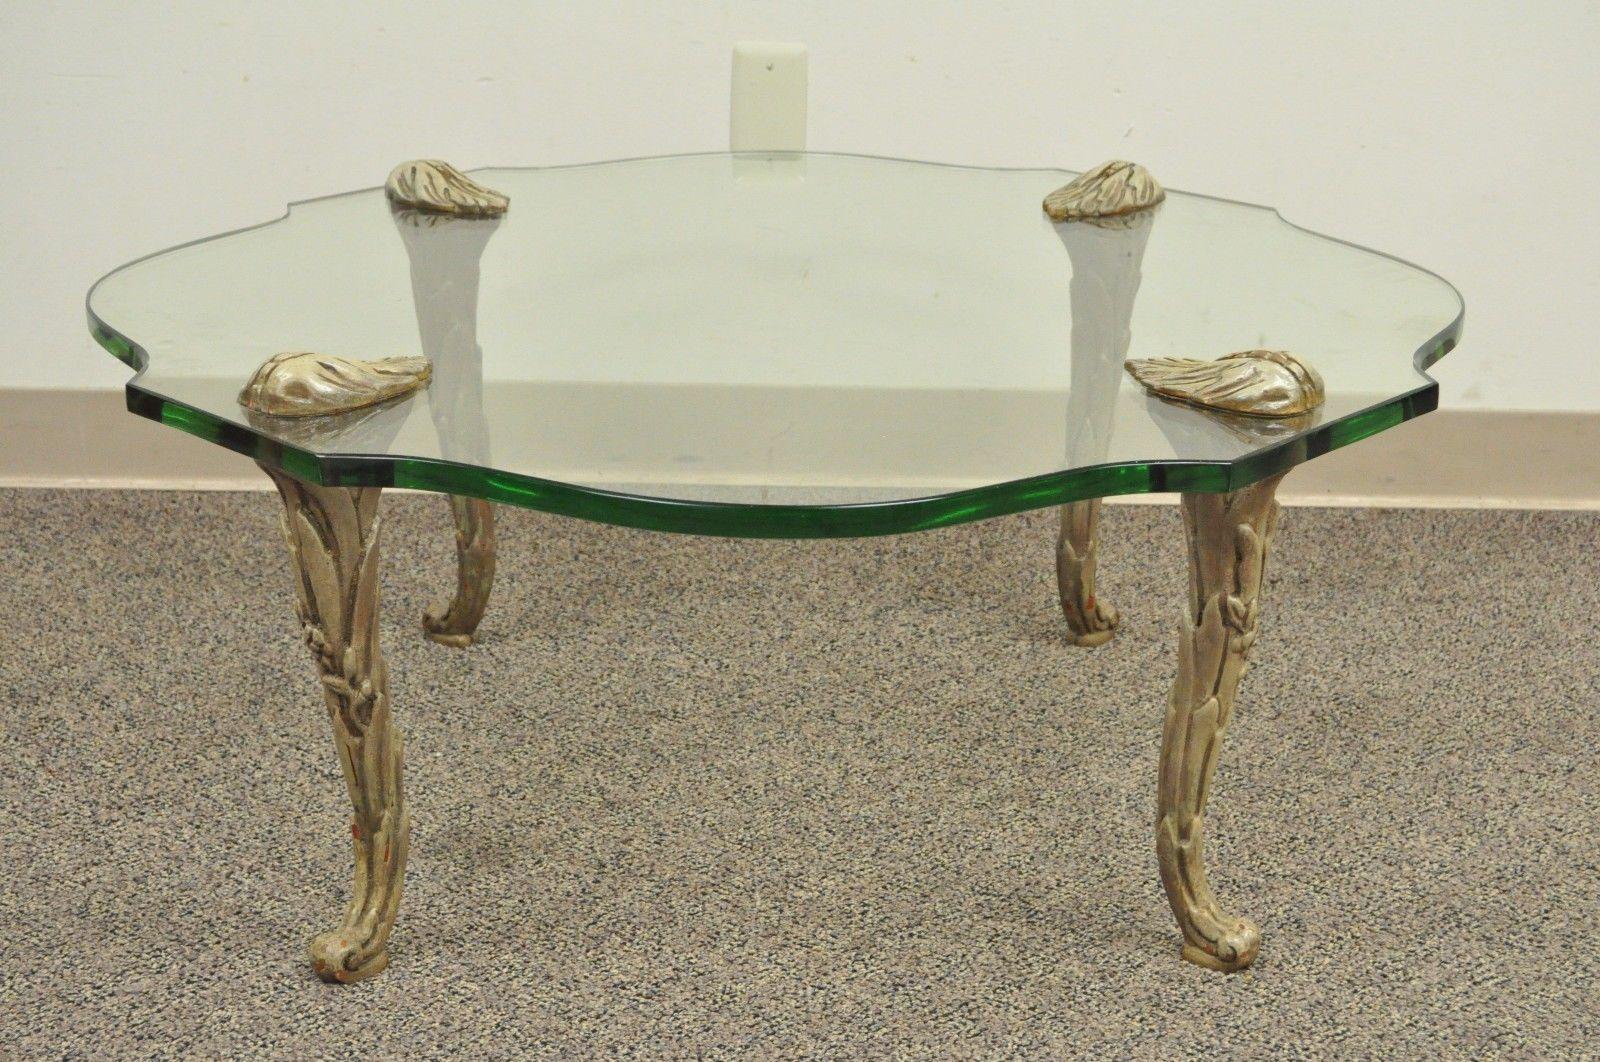 Vintage Hollywood Regency French Baguès style carved wood and glass coffee table. Item features 3/4